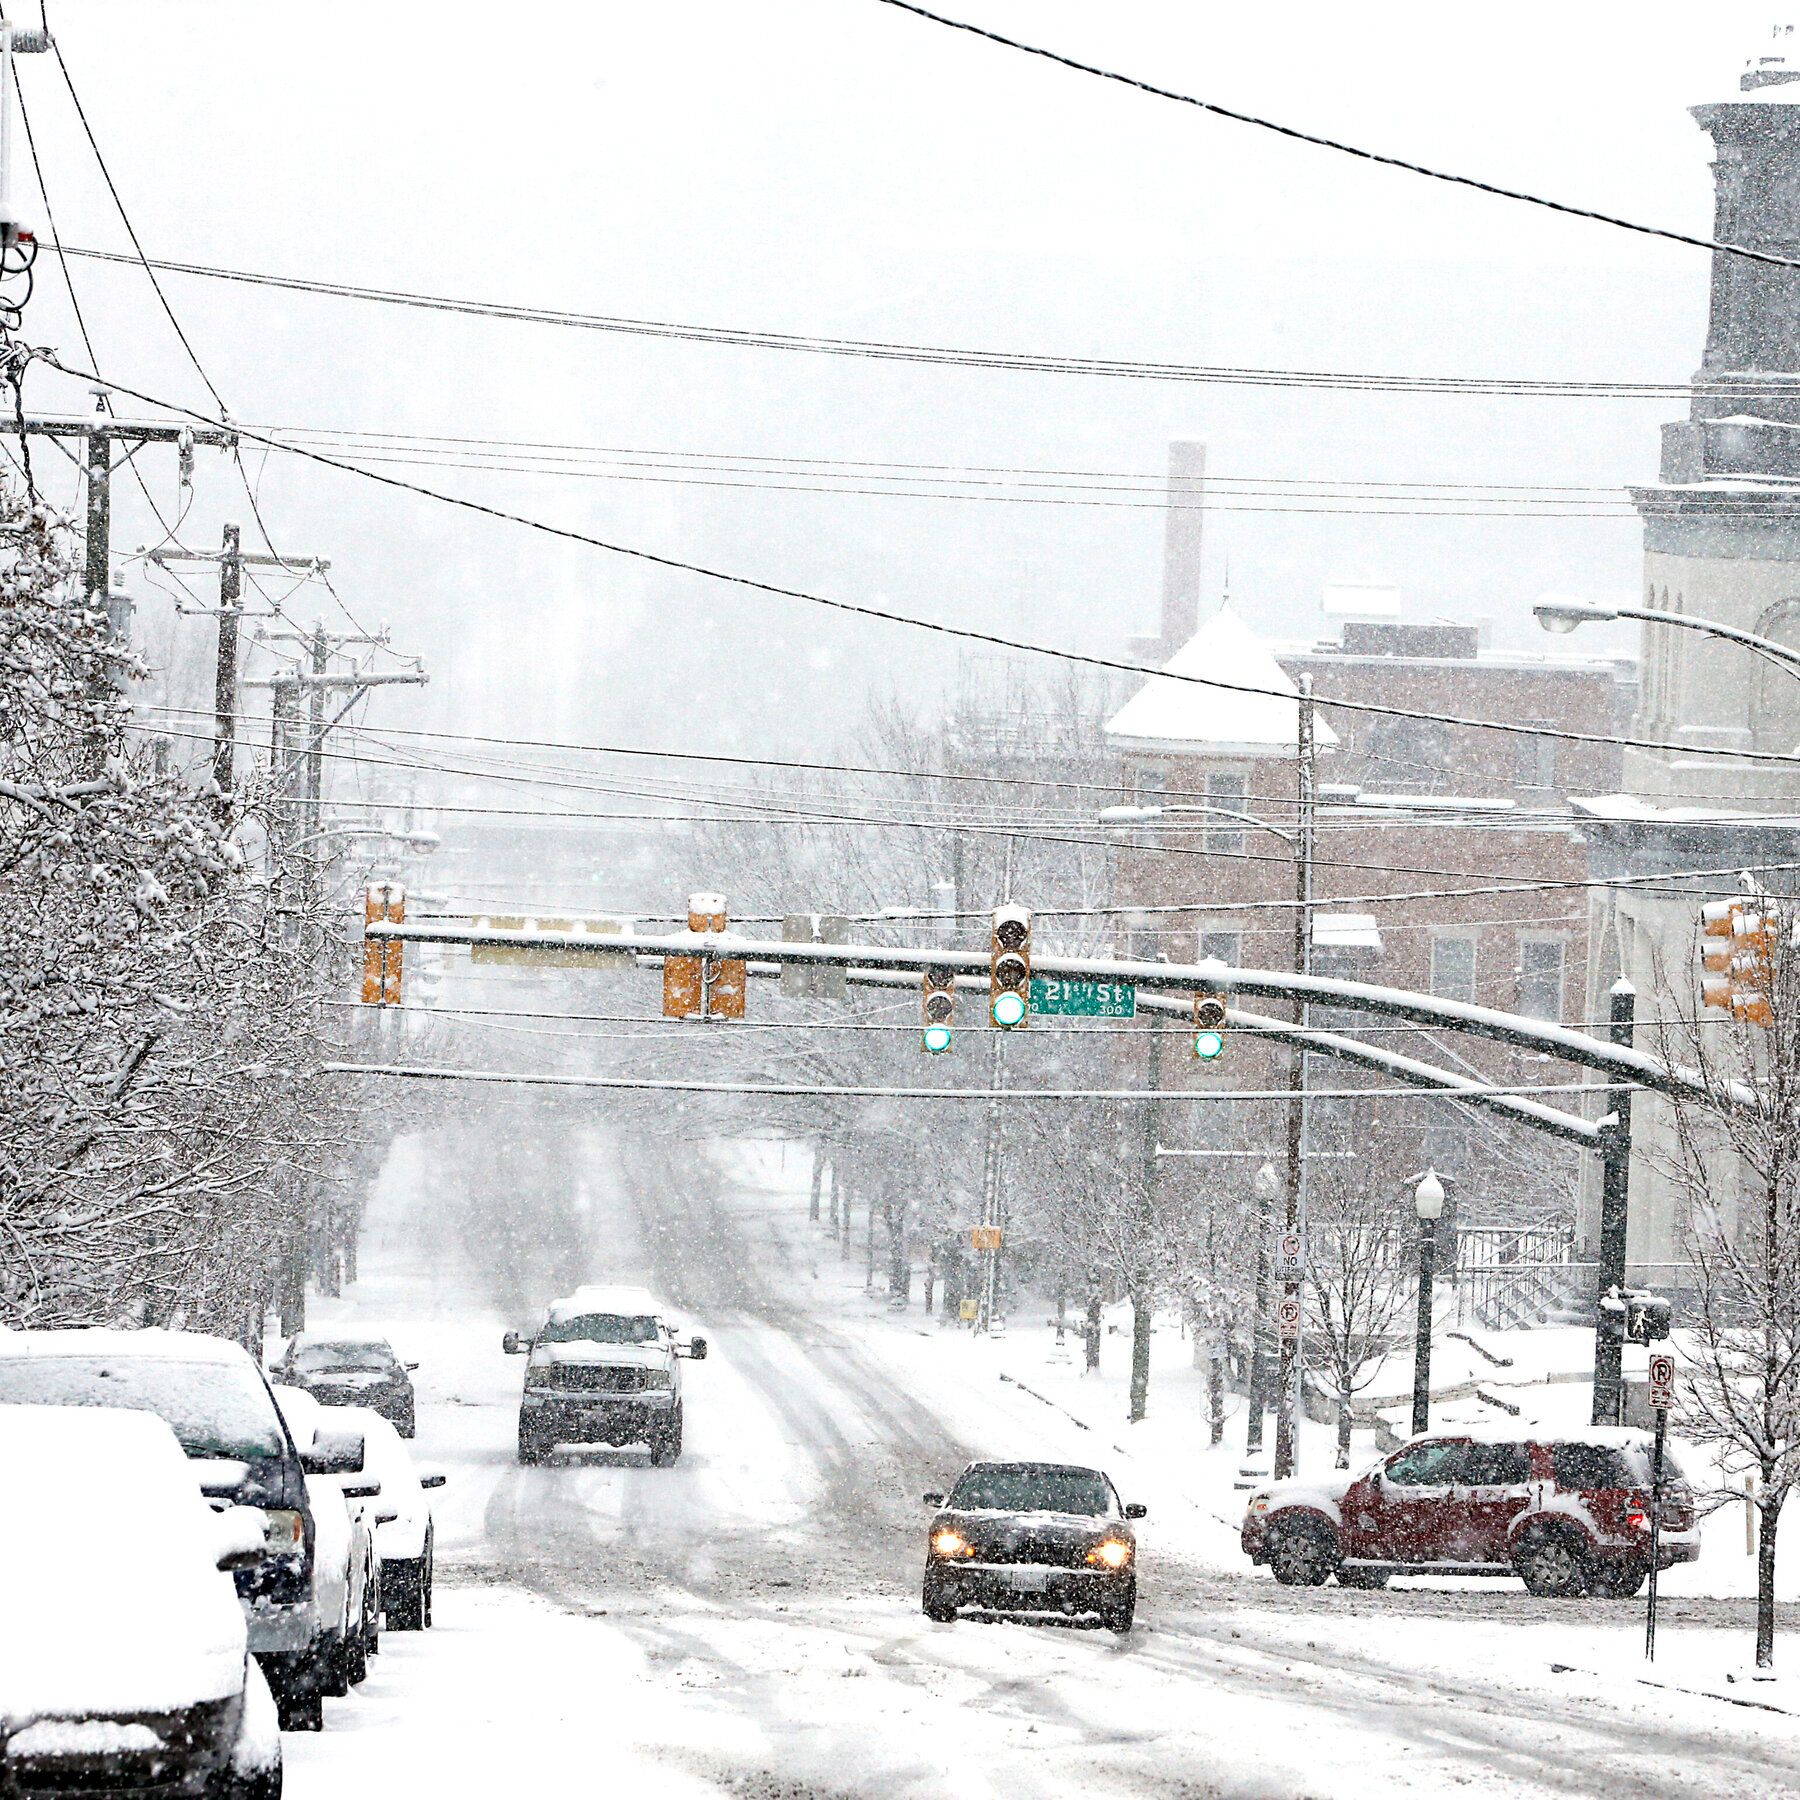 Snowstorm Expected to Bring Heavy Snow and Snarl Travel